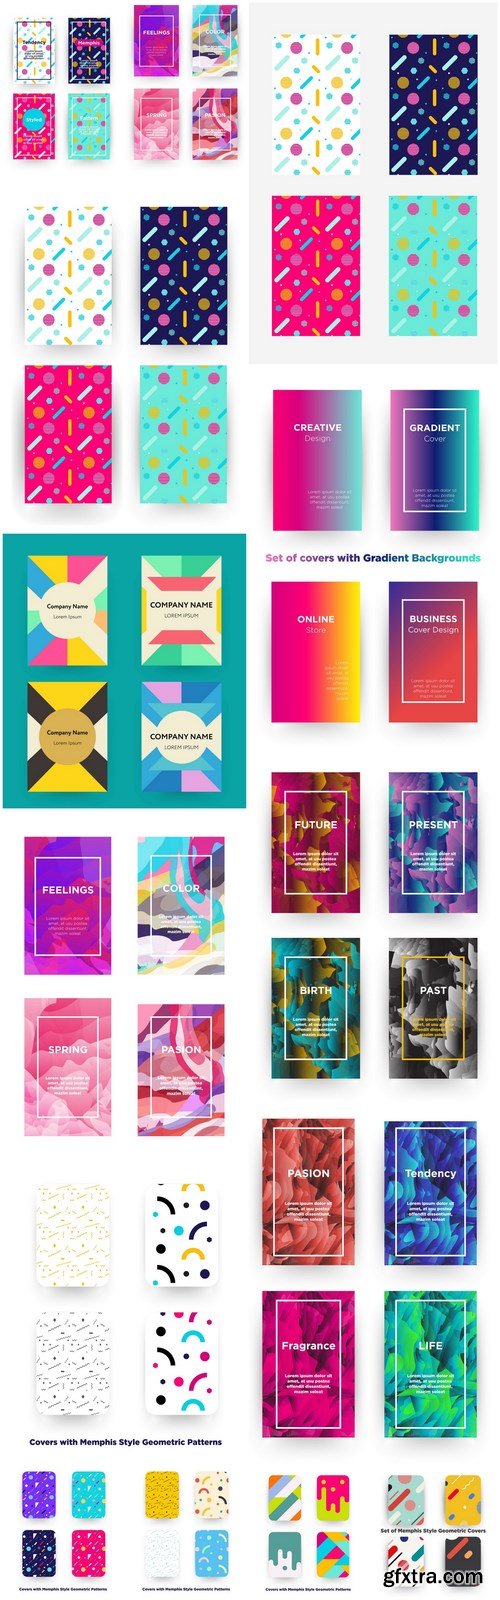 Abstract Cover Template Design - 14 Vector